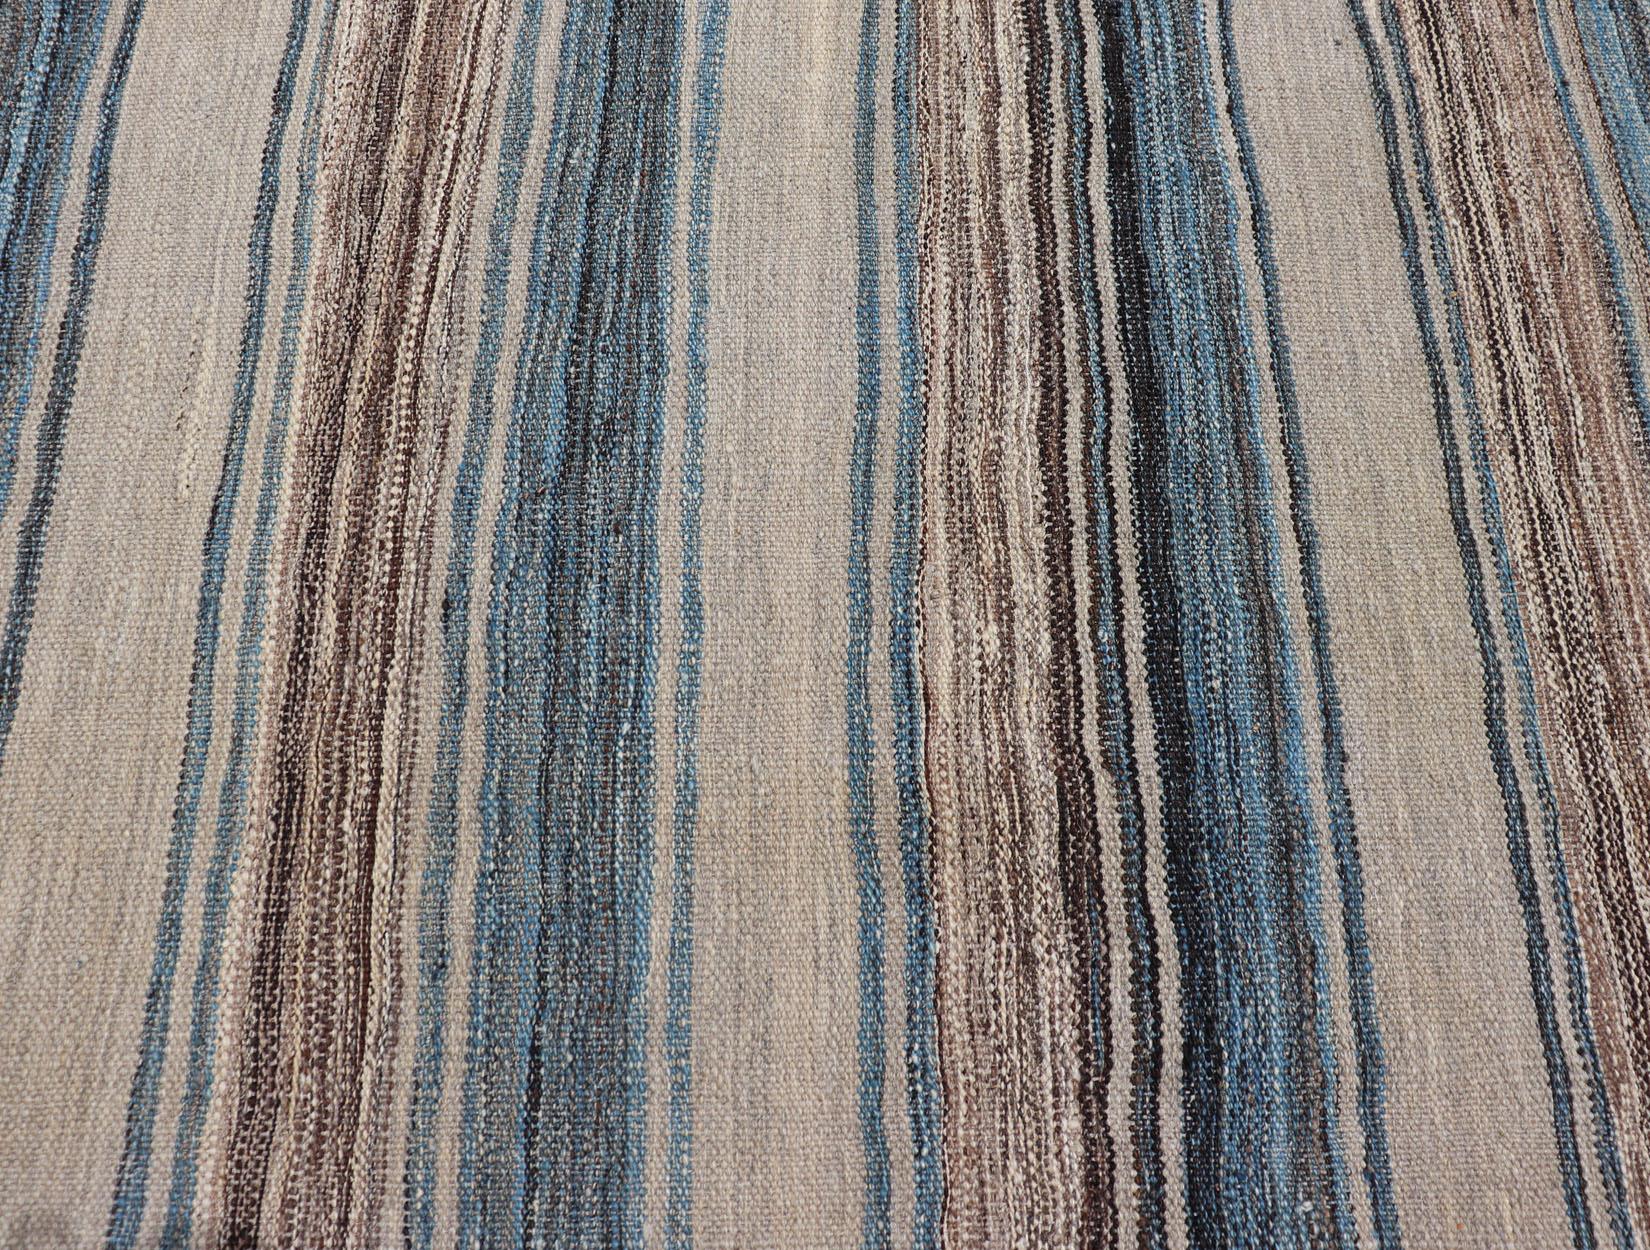 Versatile Striped Design and Natural Brown, Cream, and Blue Flat-Weave Kilim For Sale 2